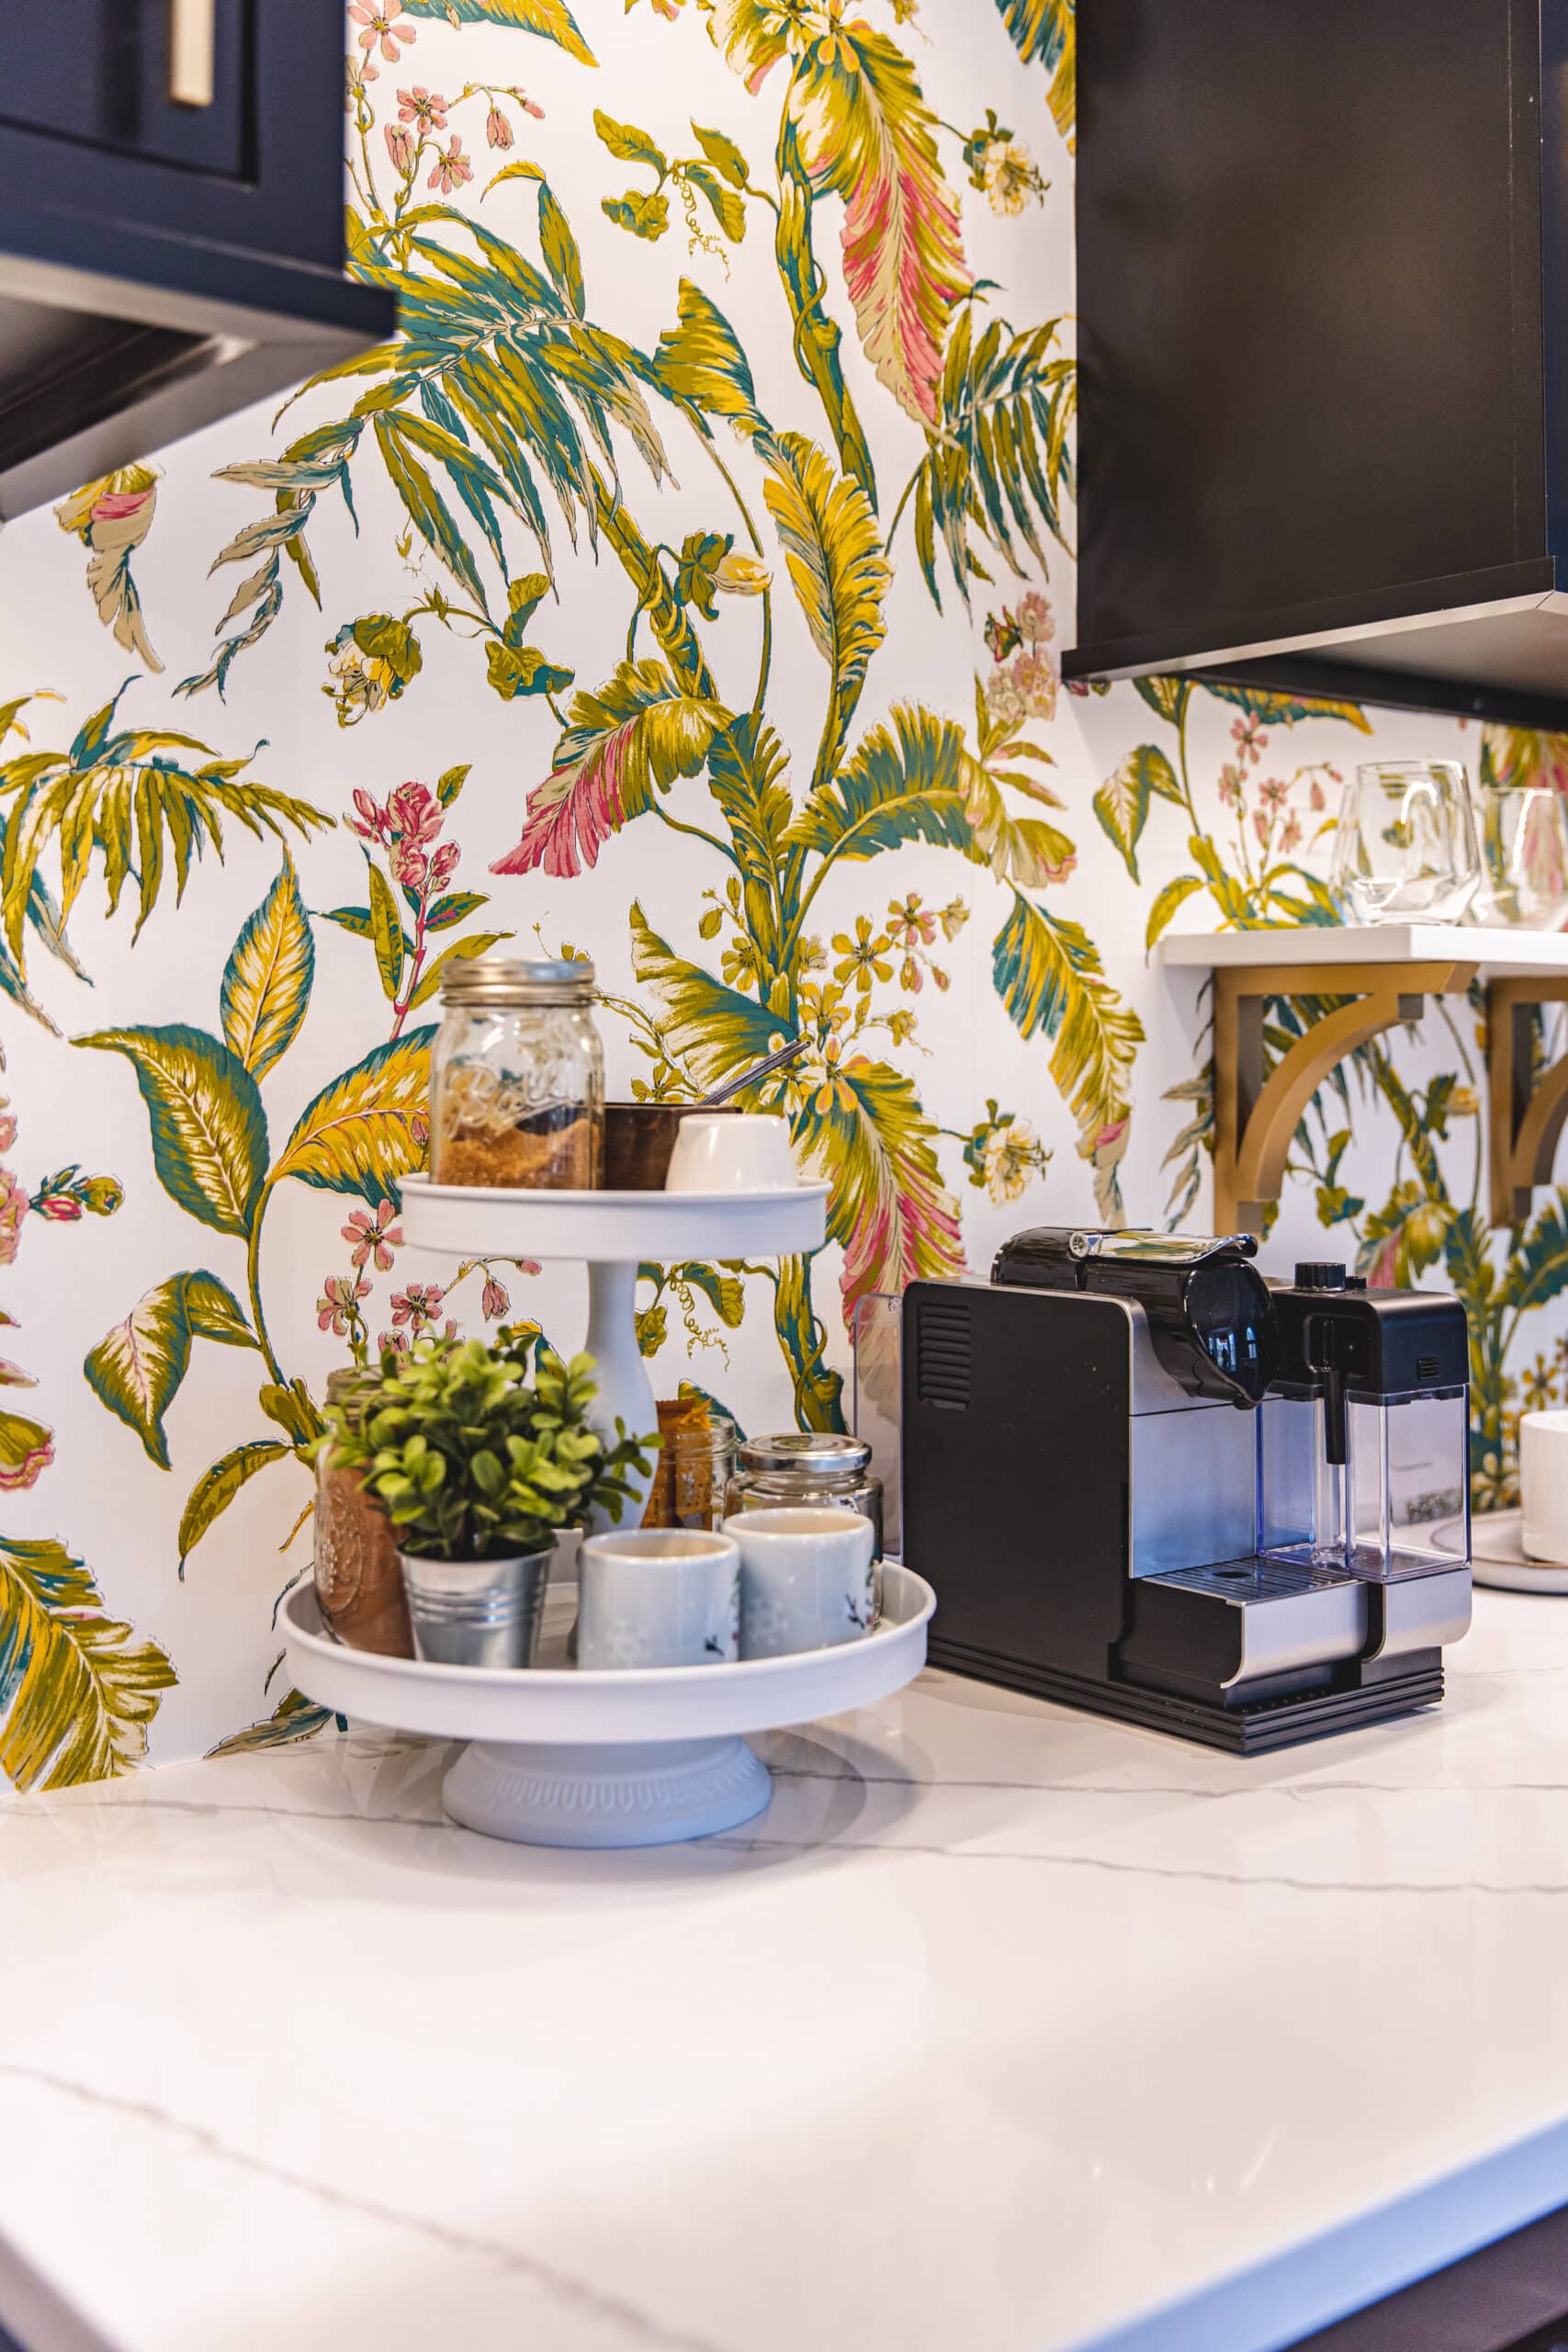 A kitchen with vibrant tropical wallpaper and a coffee maker